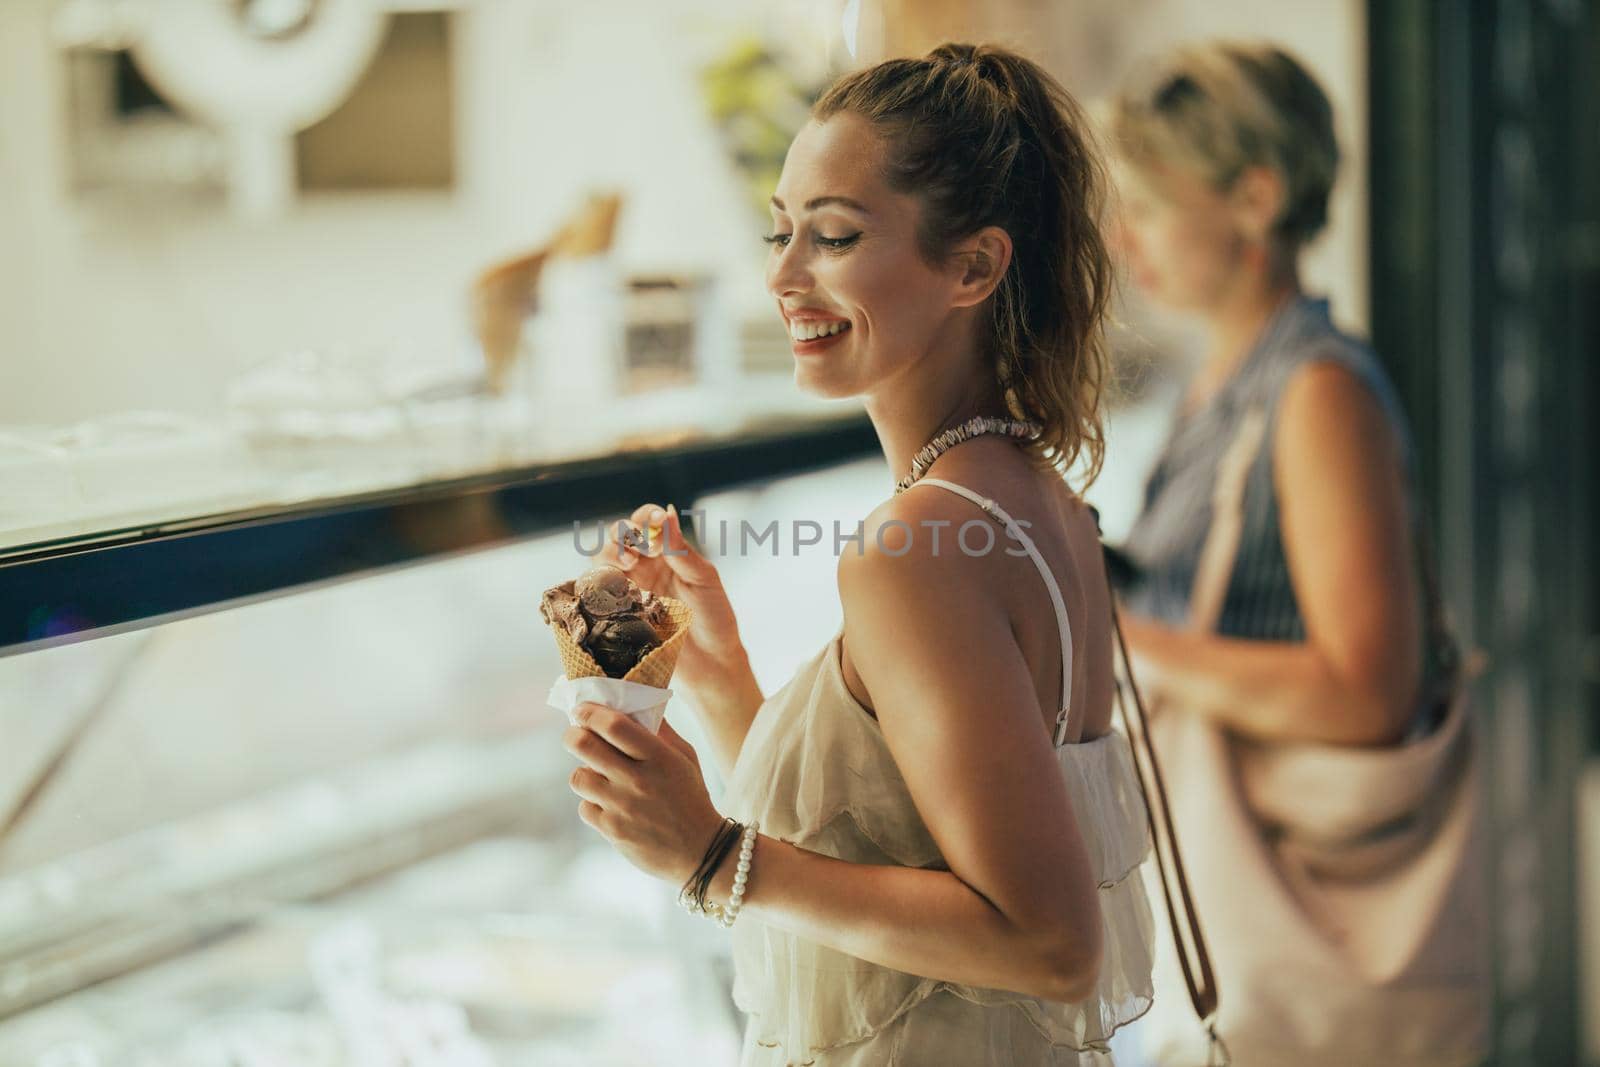 Portrait of an attractive young woman enjoying an ice cream.